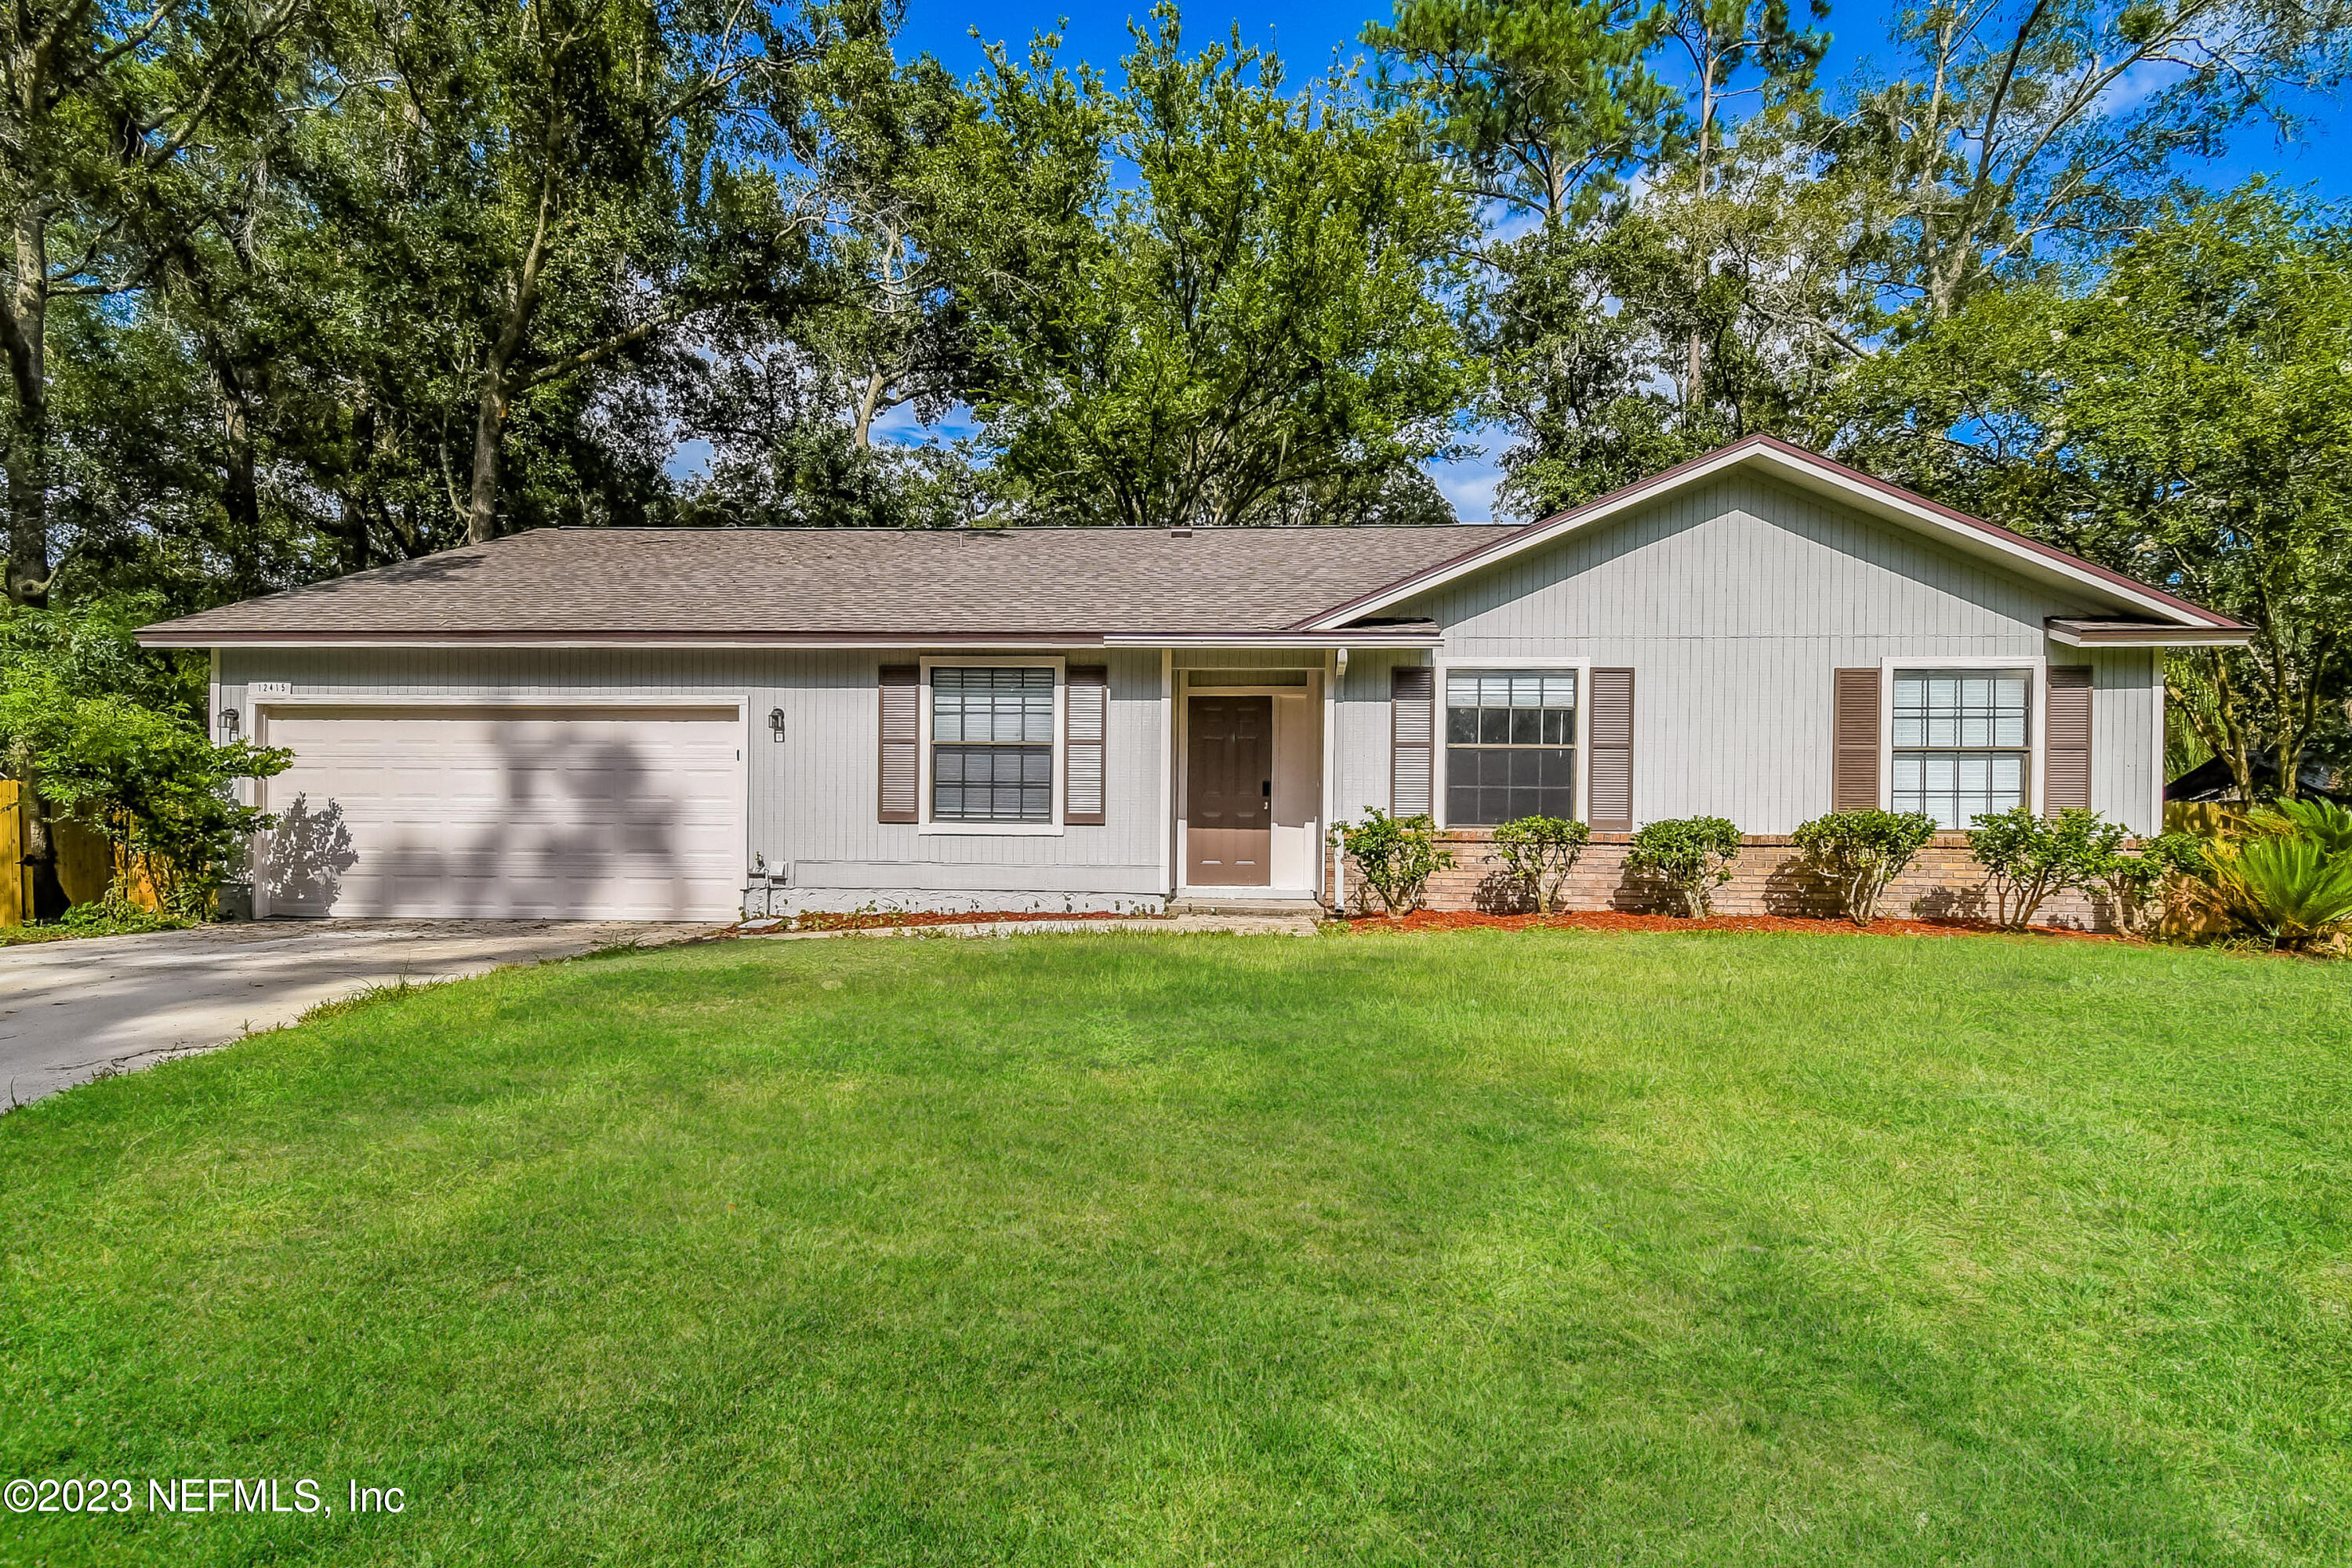 Jacksonville, FL home for sale located at 12415 AUTUMNBROOK Trail W, Jacksonville, FL 32258